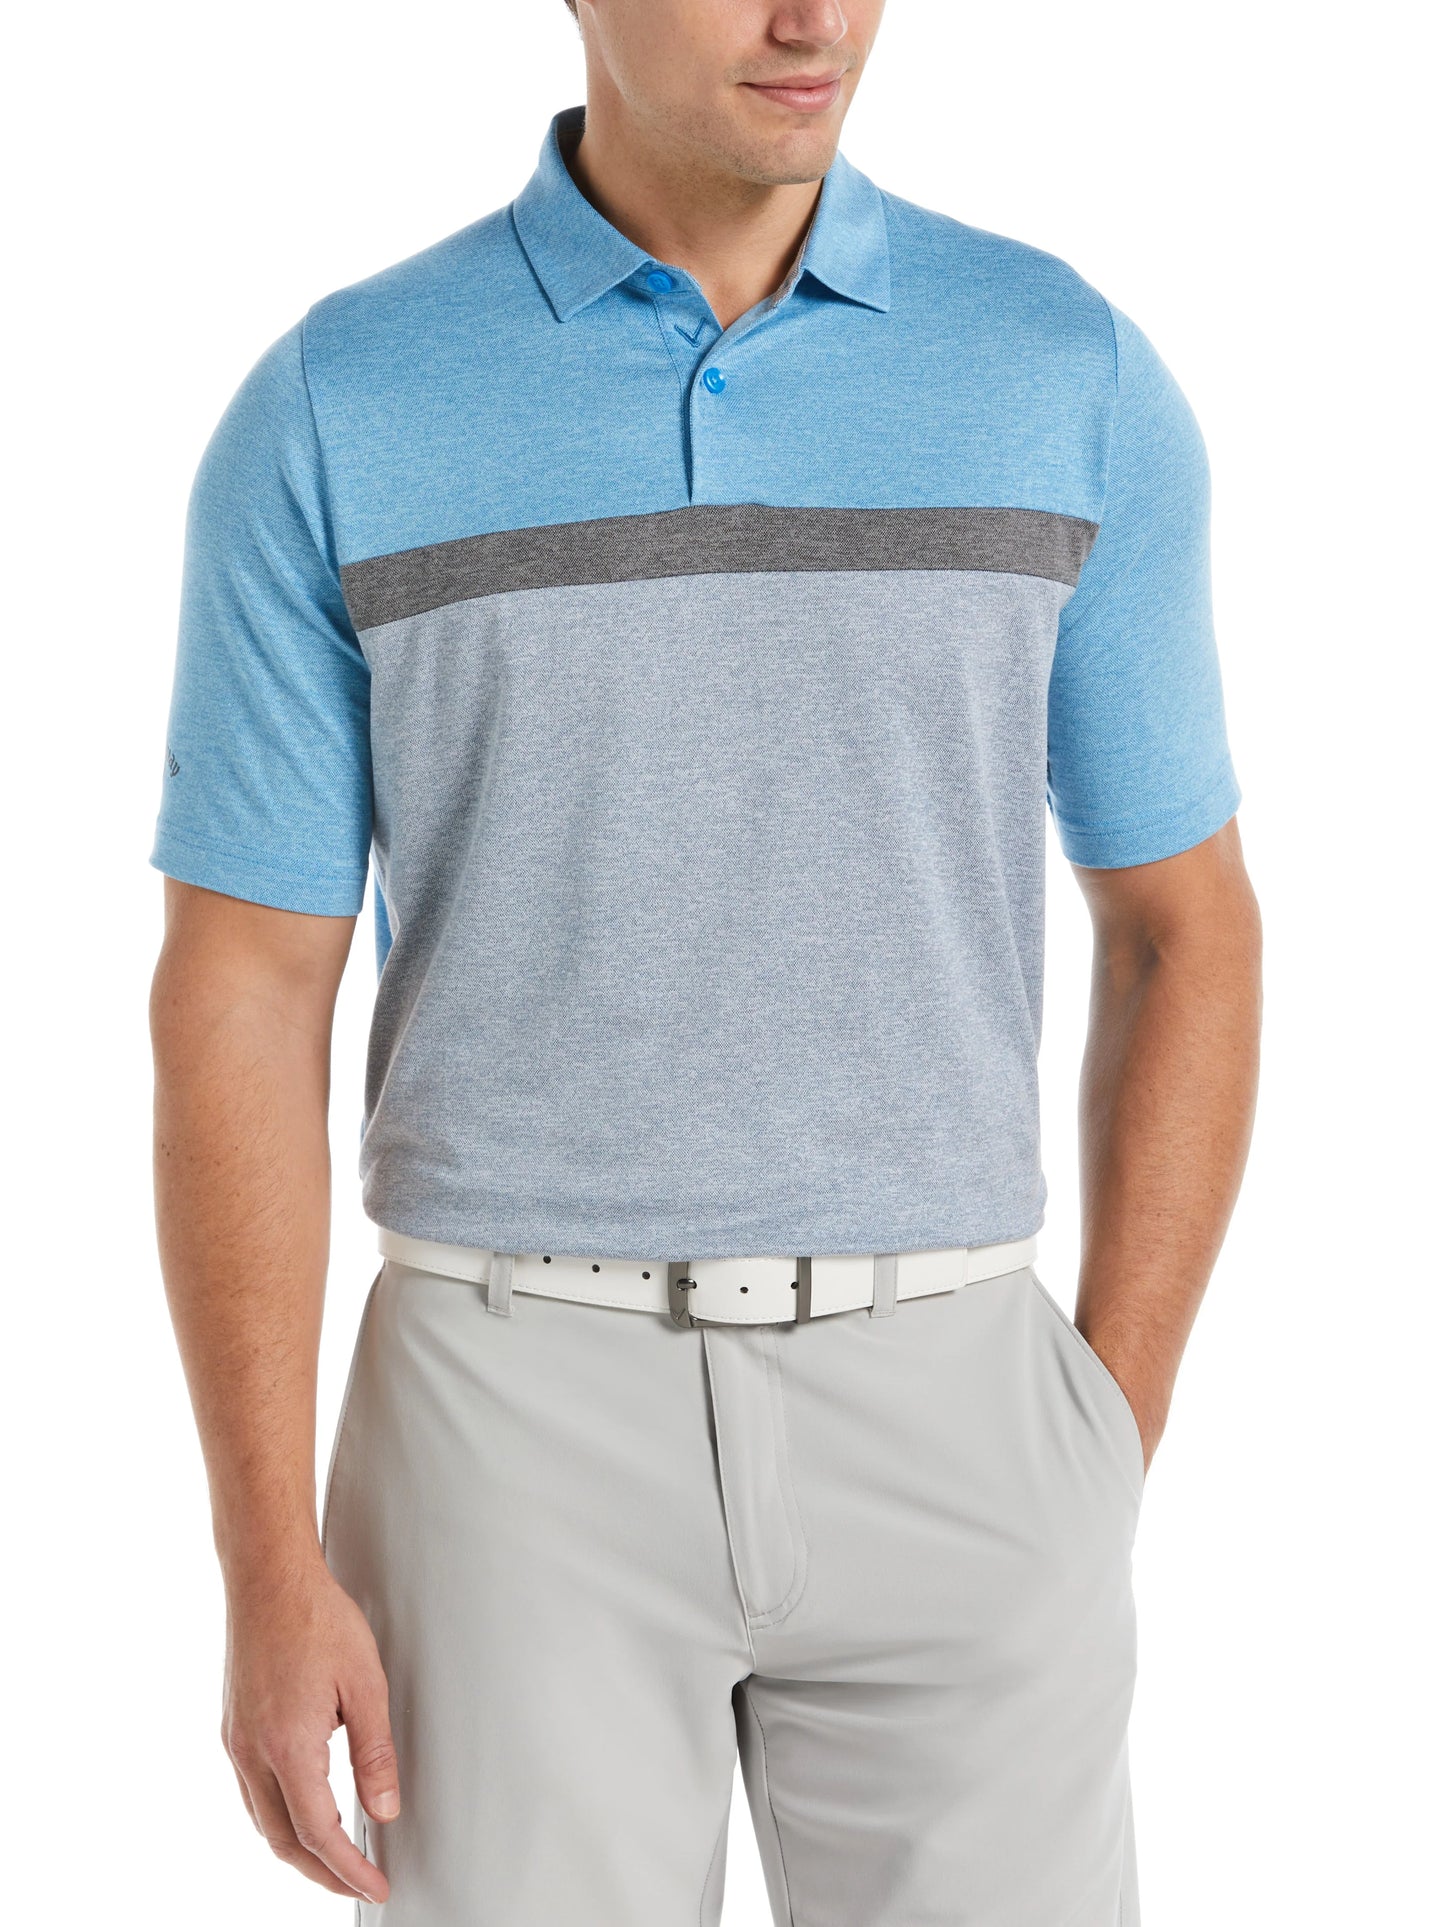 Mens Soft Touch Color Block Golf Polo